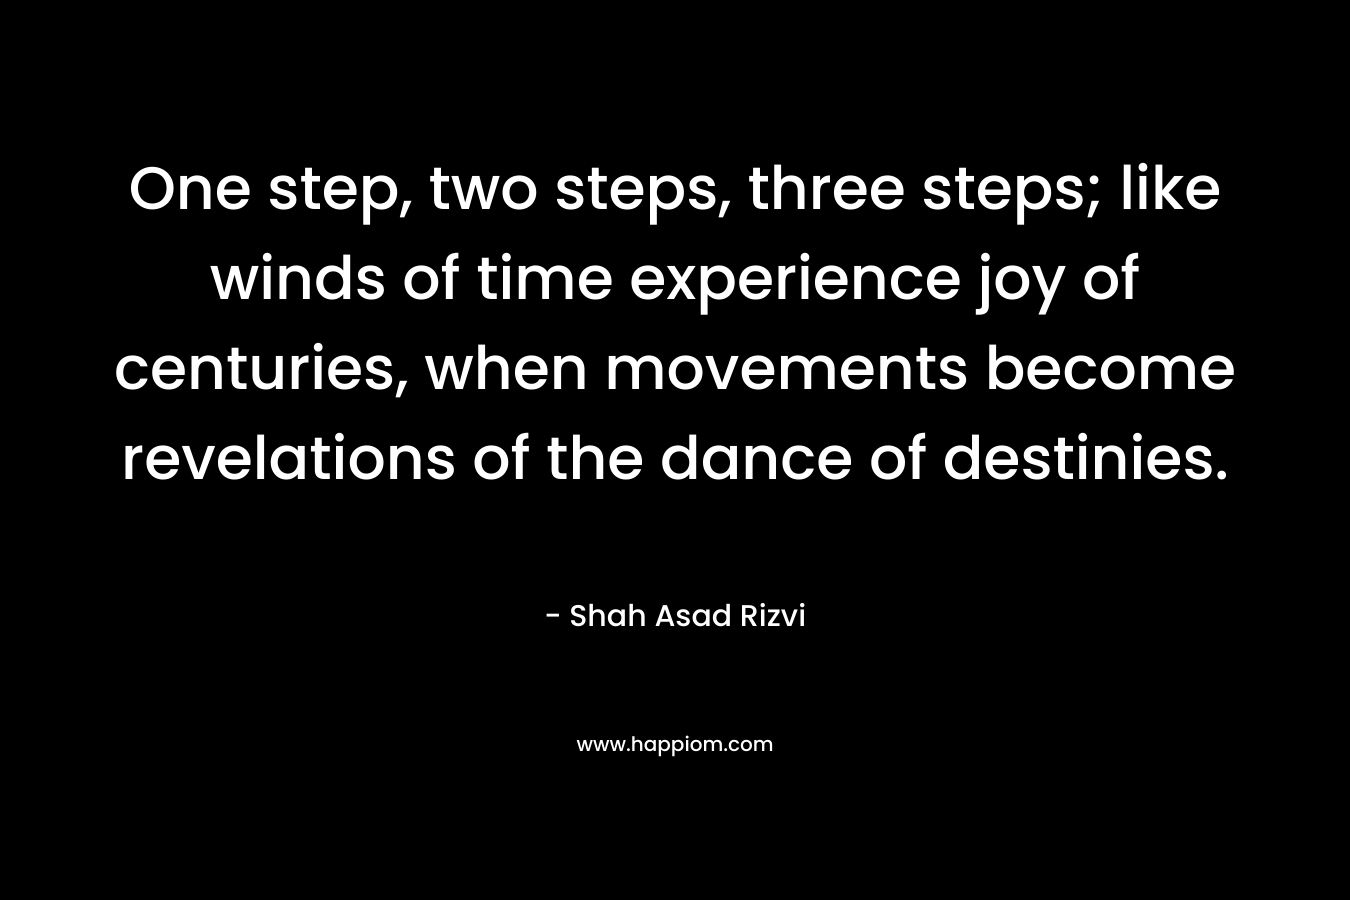 One step, two steps, three steps; like winds of time experience joy of centuries, when movements become revelations of the dance of destinies.